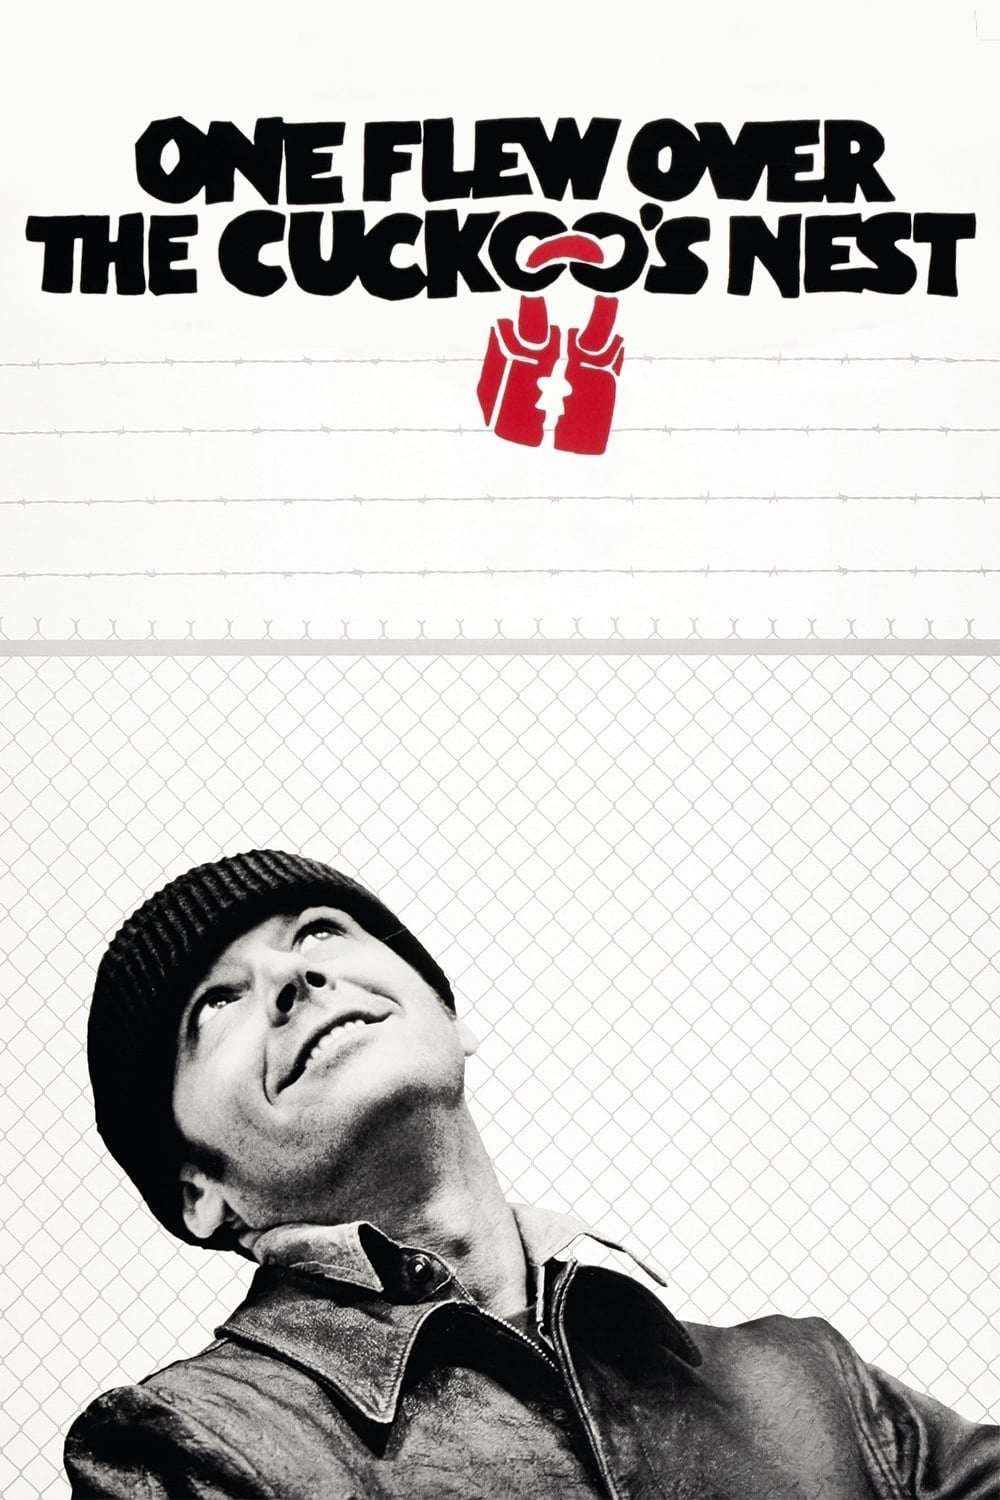 One Flew Over the Cuckoo's Nest (1975)-Movies on Mental illness which Everyone Should Watch